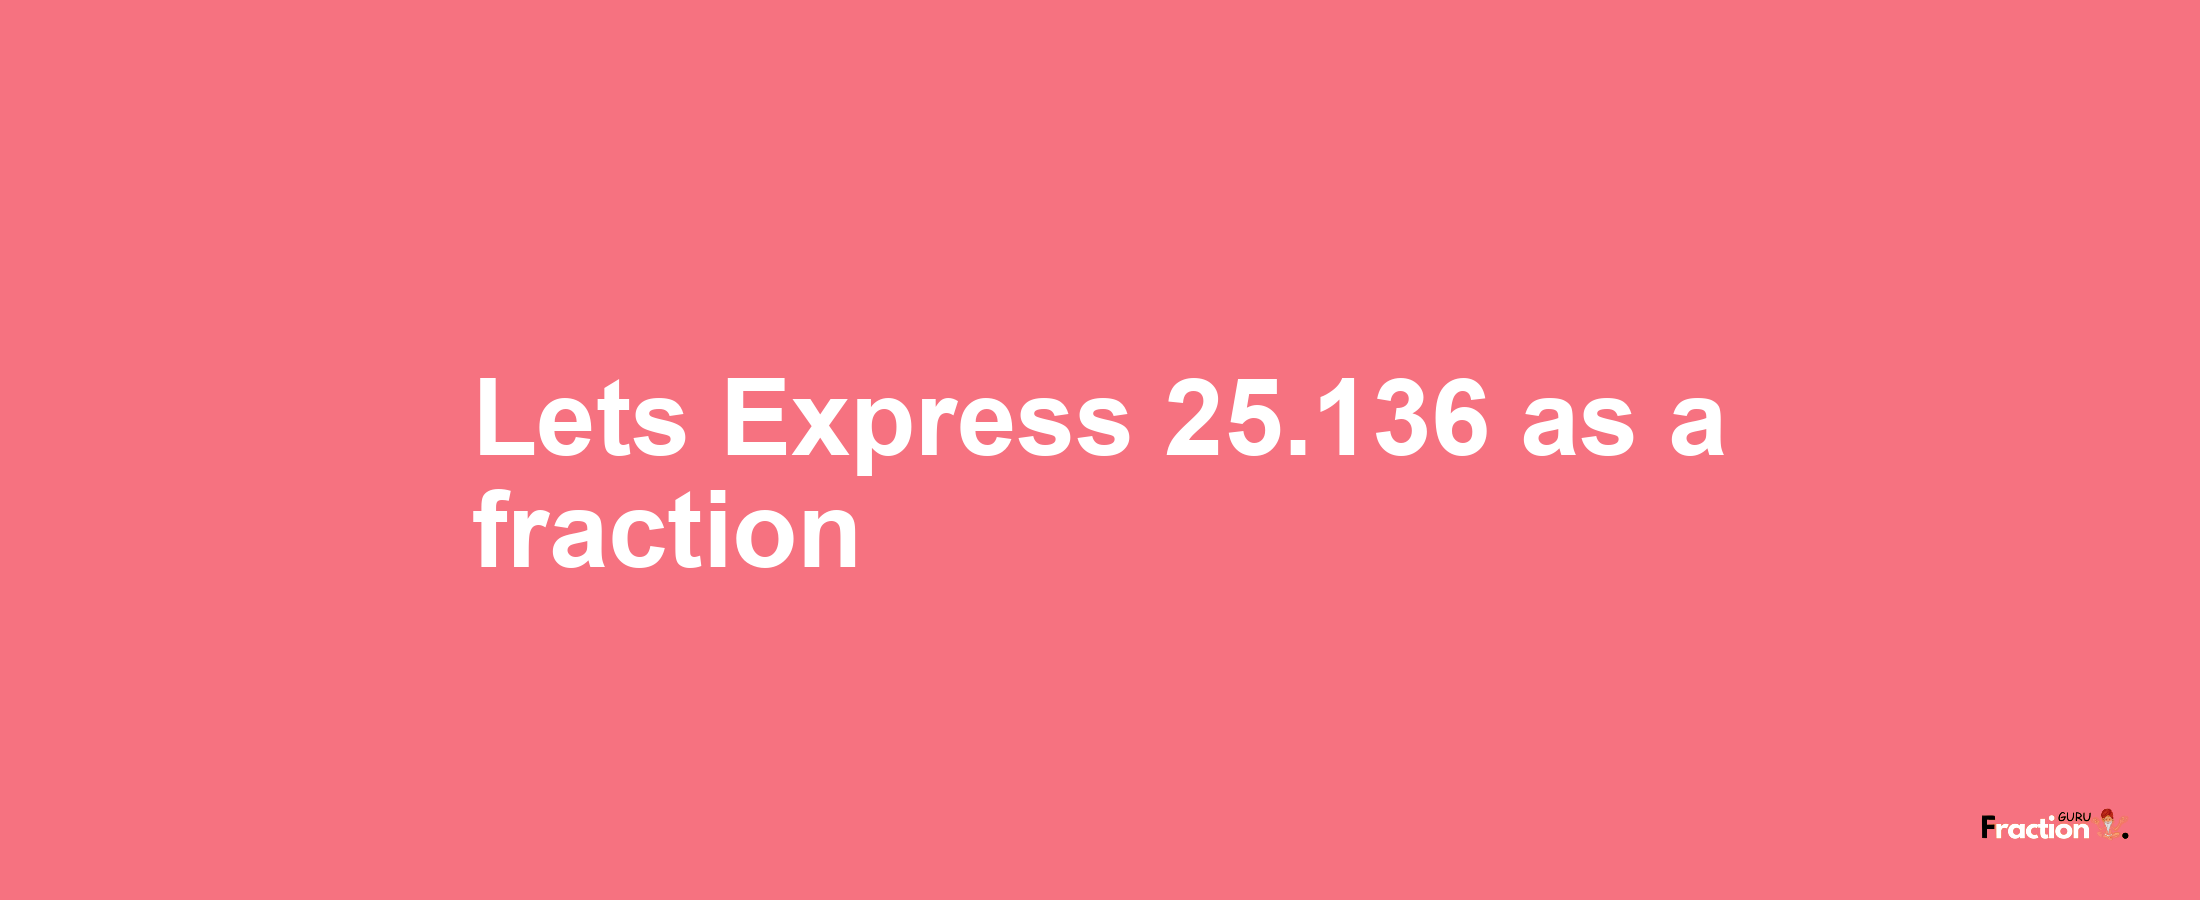 Lets Express 25.136 as afraction